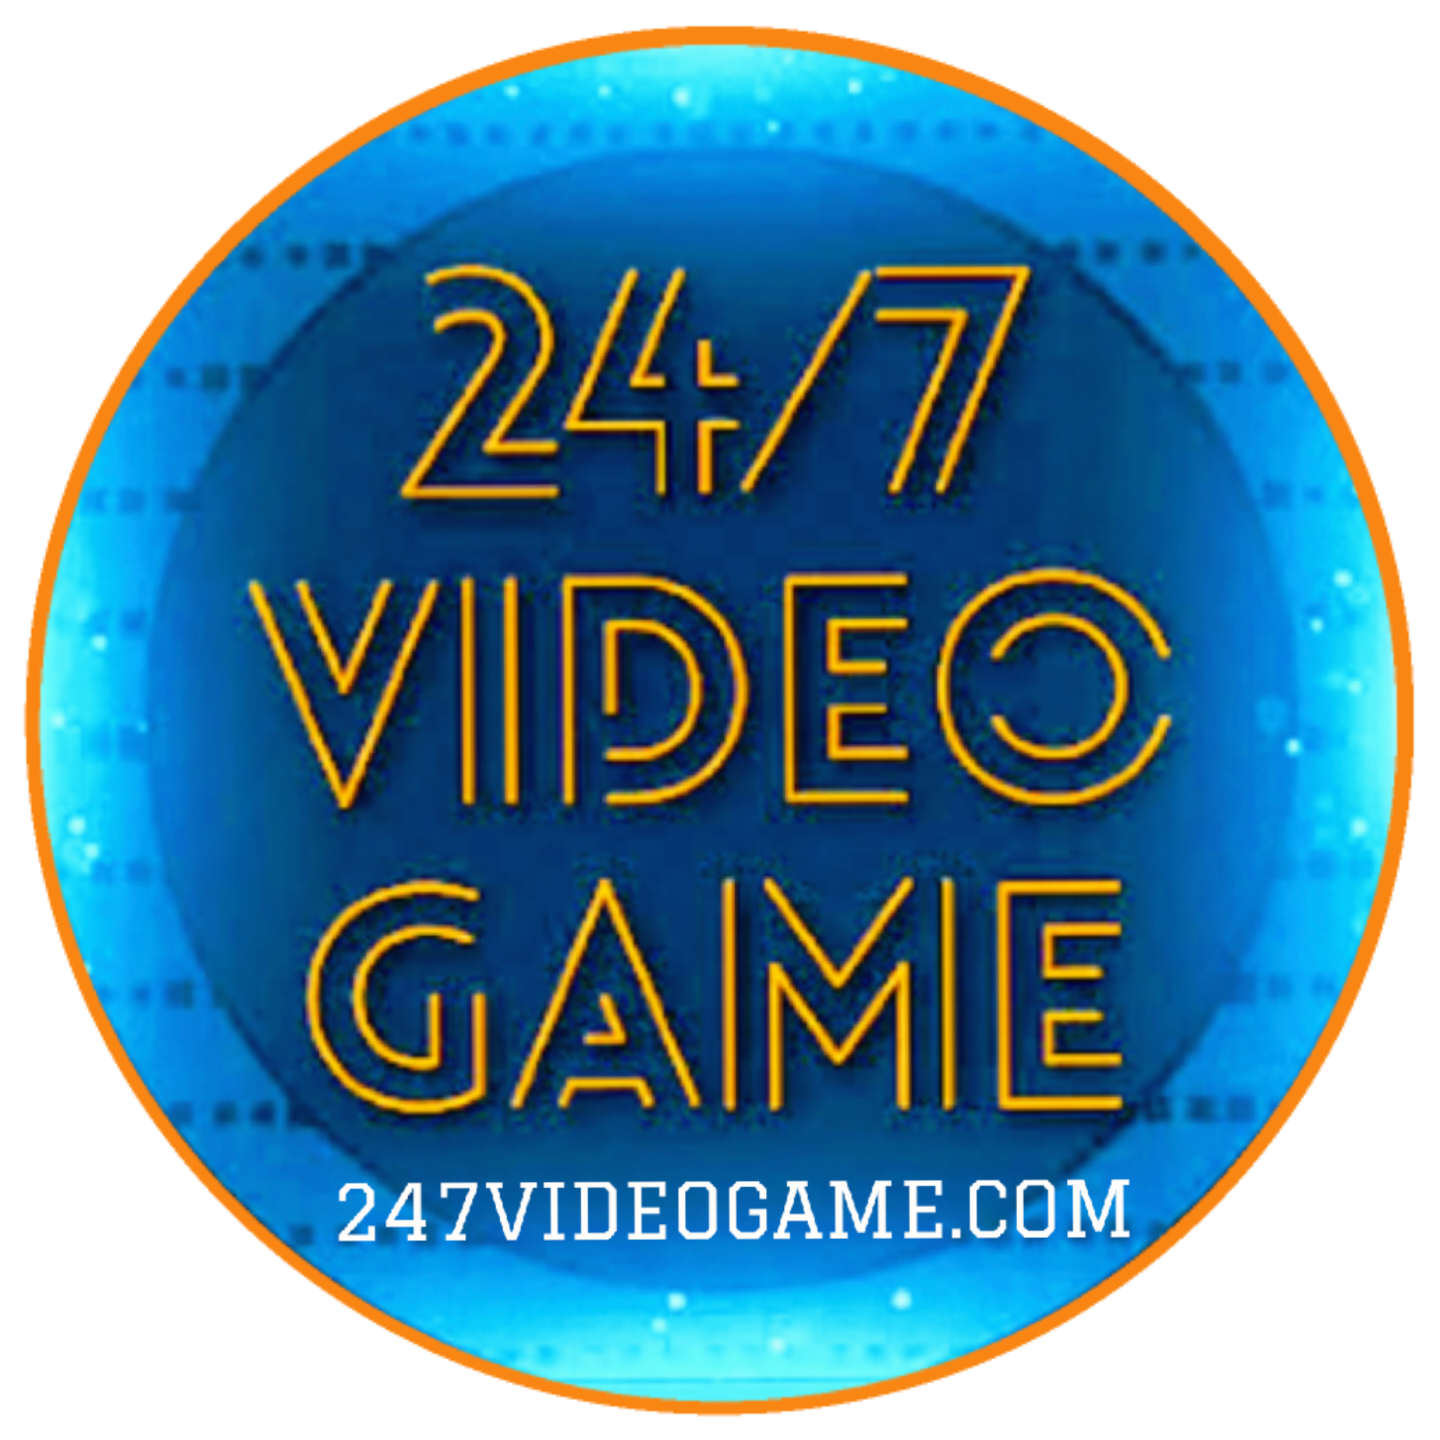 24/7 Video Game